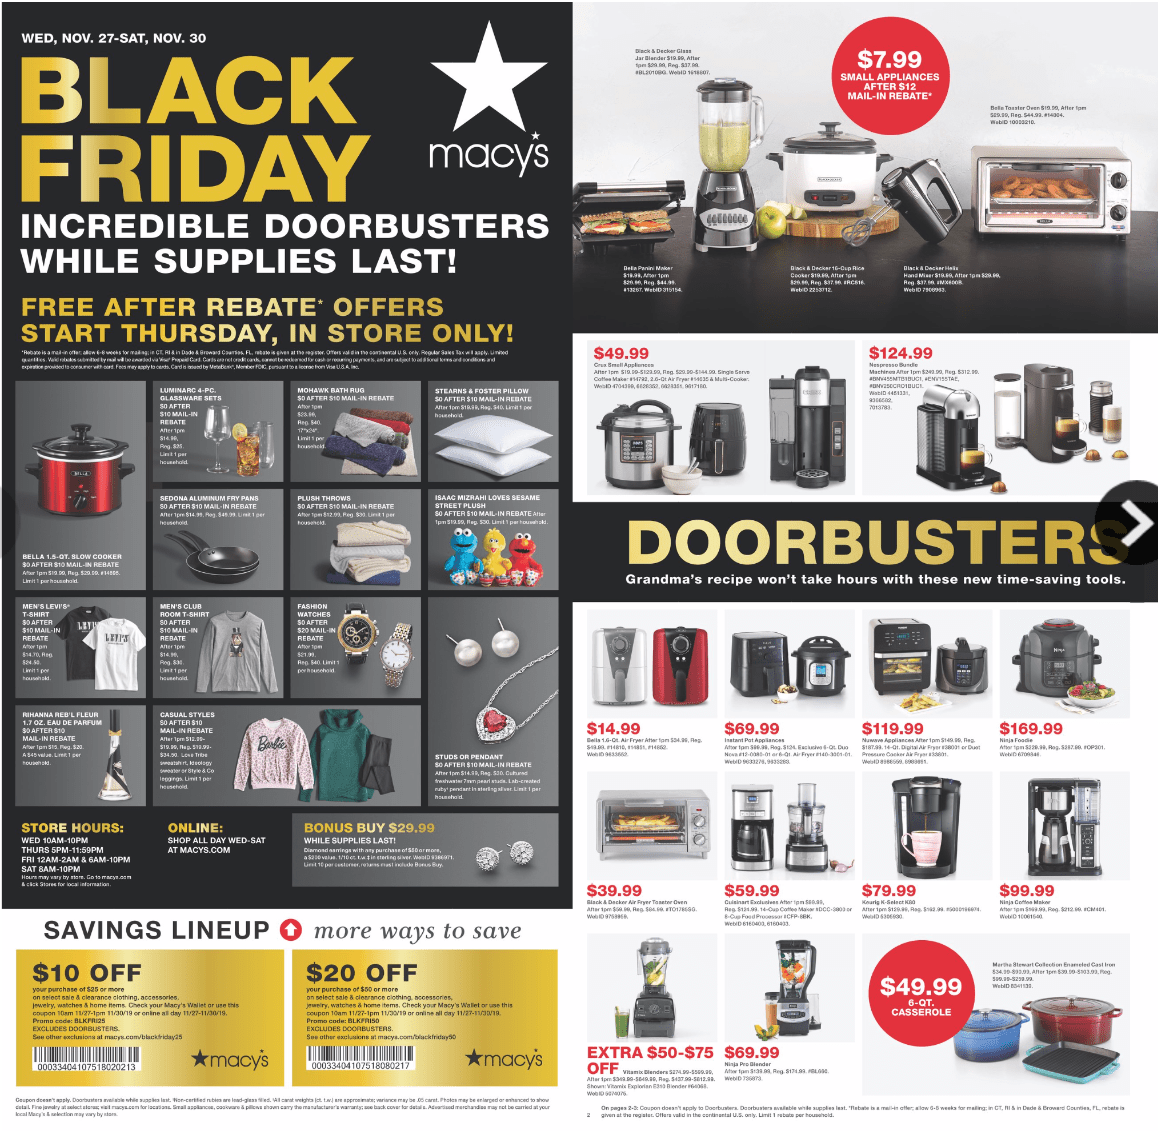 Macy's Black Friday ad has home goods, tech, and more 9to5Toys